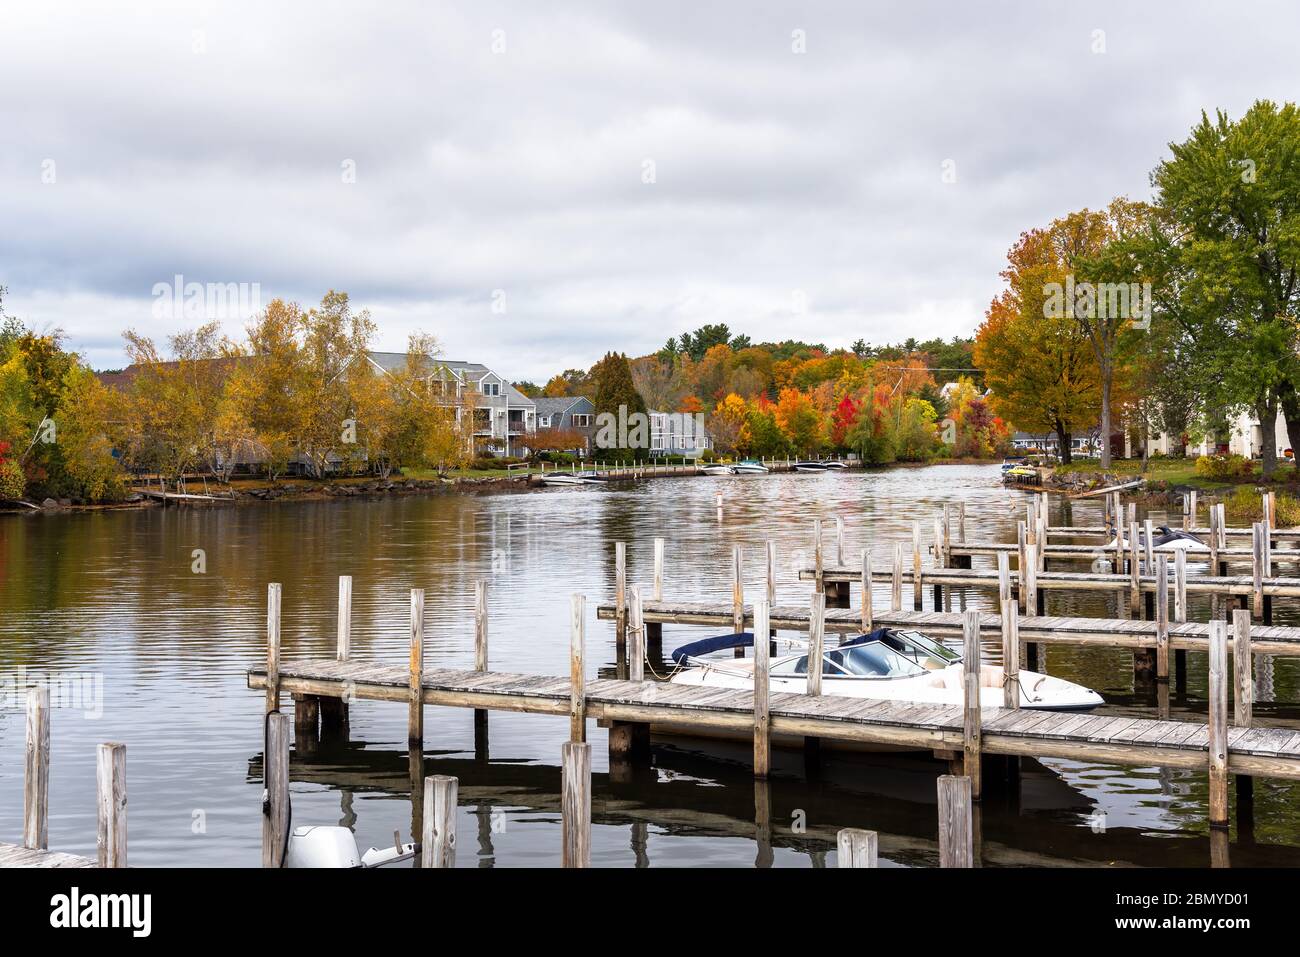 Wooden jetties on a river on a cloudy autumn day. Riverside apartment buildings and colouful autumnal trees are on the other side of the river. Stock Photo